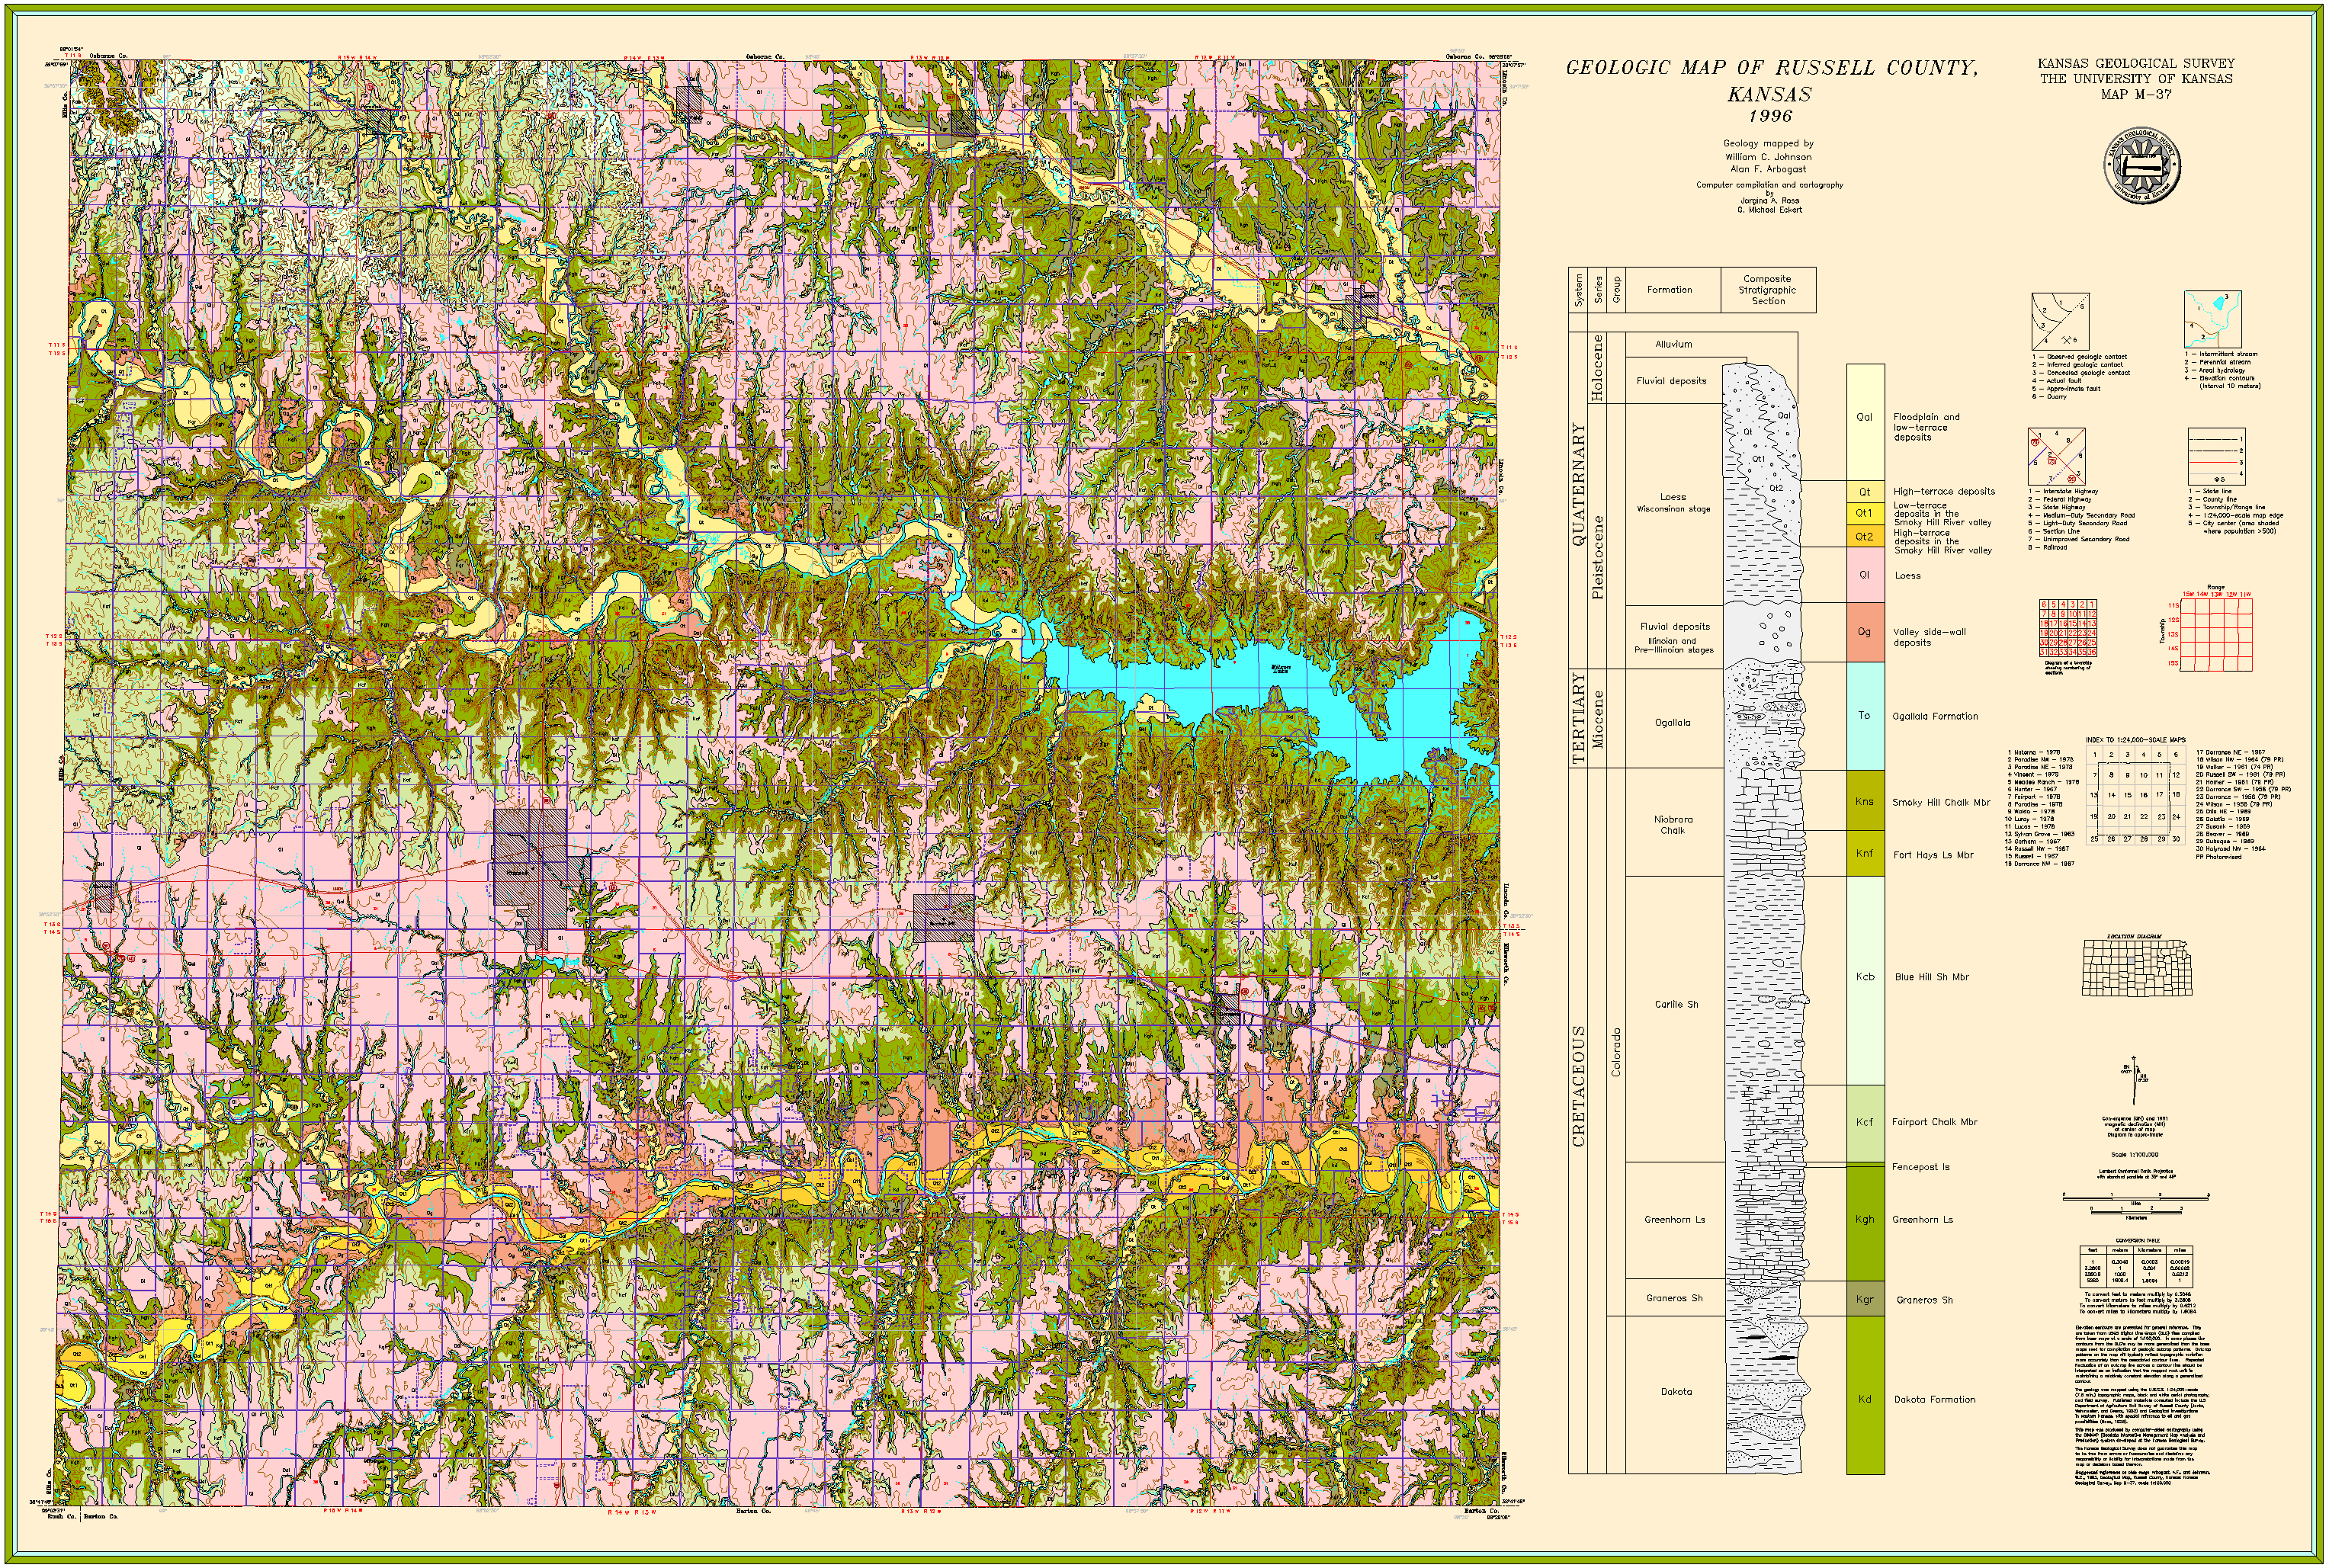 Large GIF of Russel County geologic map.